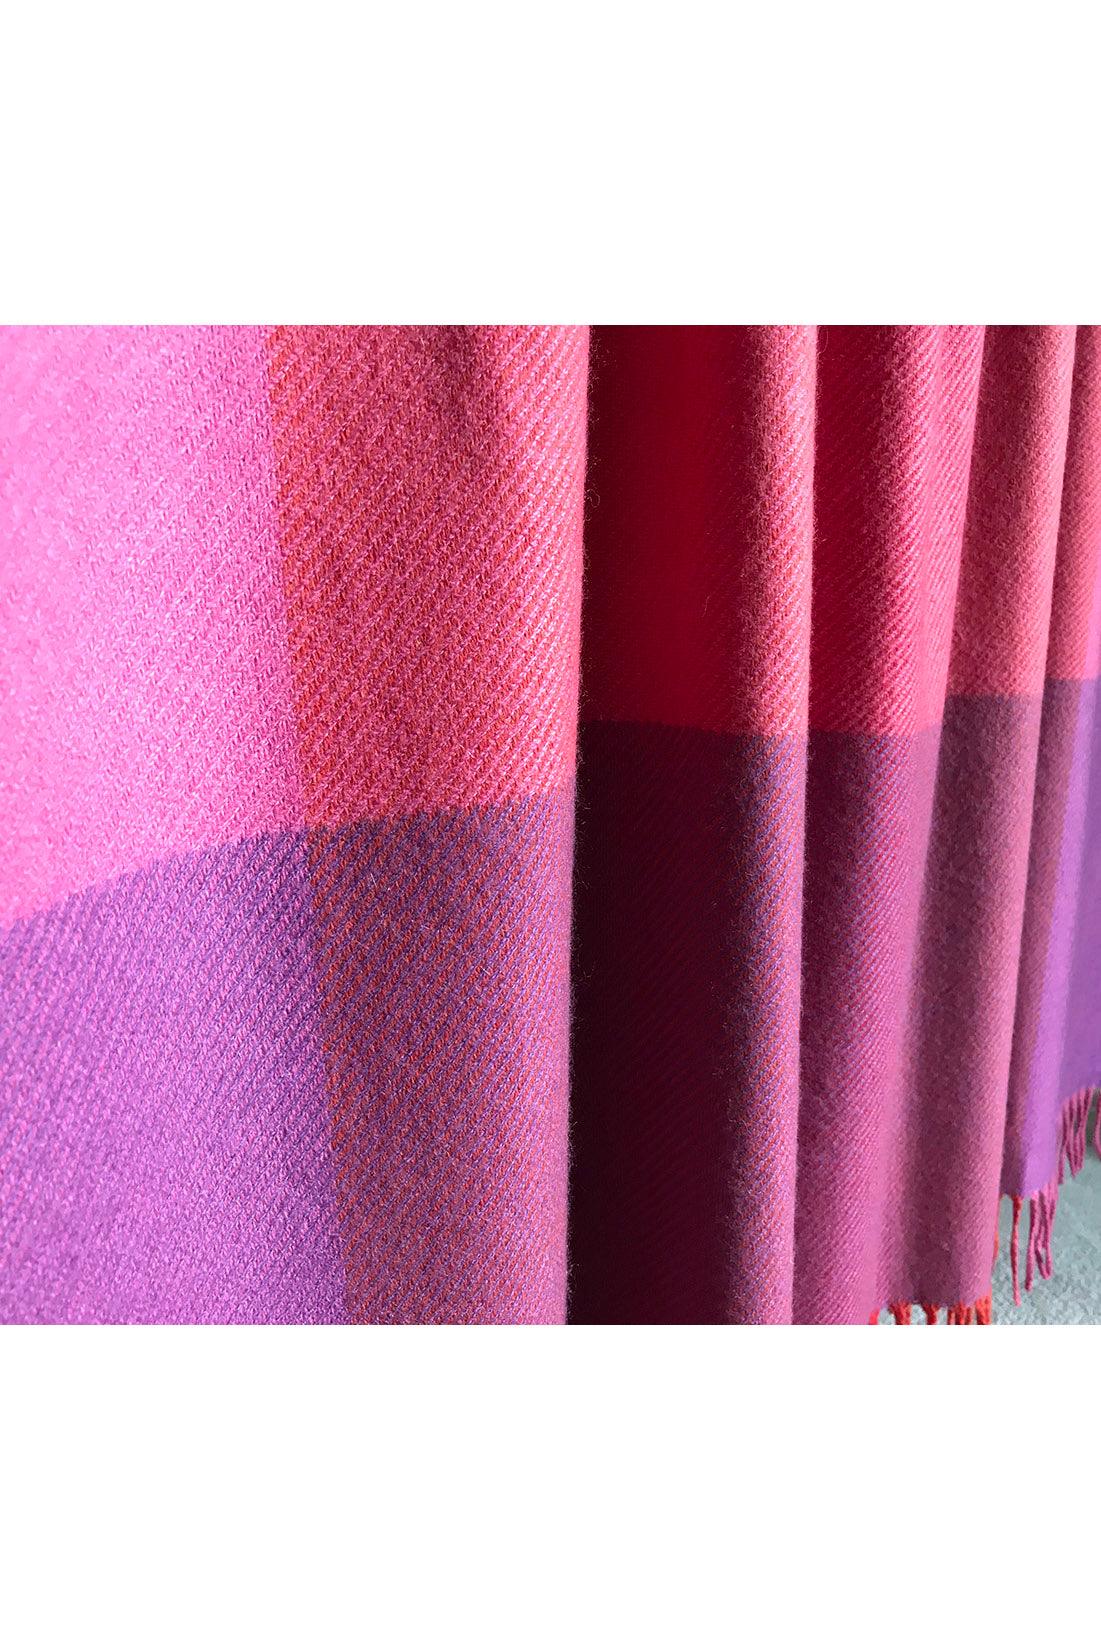 Cashmere throw wrap in red pink check - SEMON Cashmere